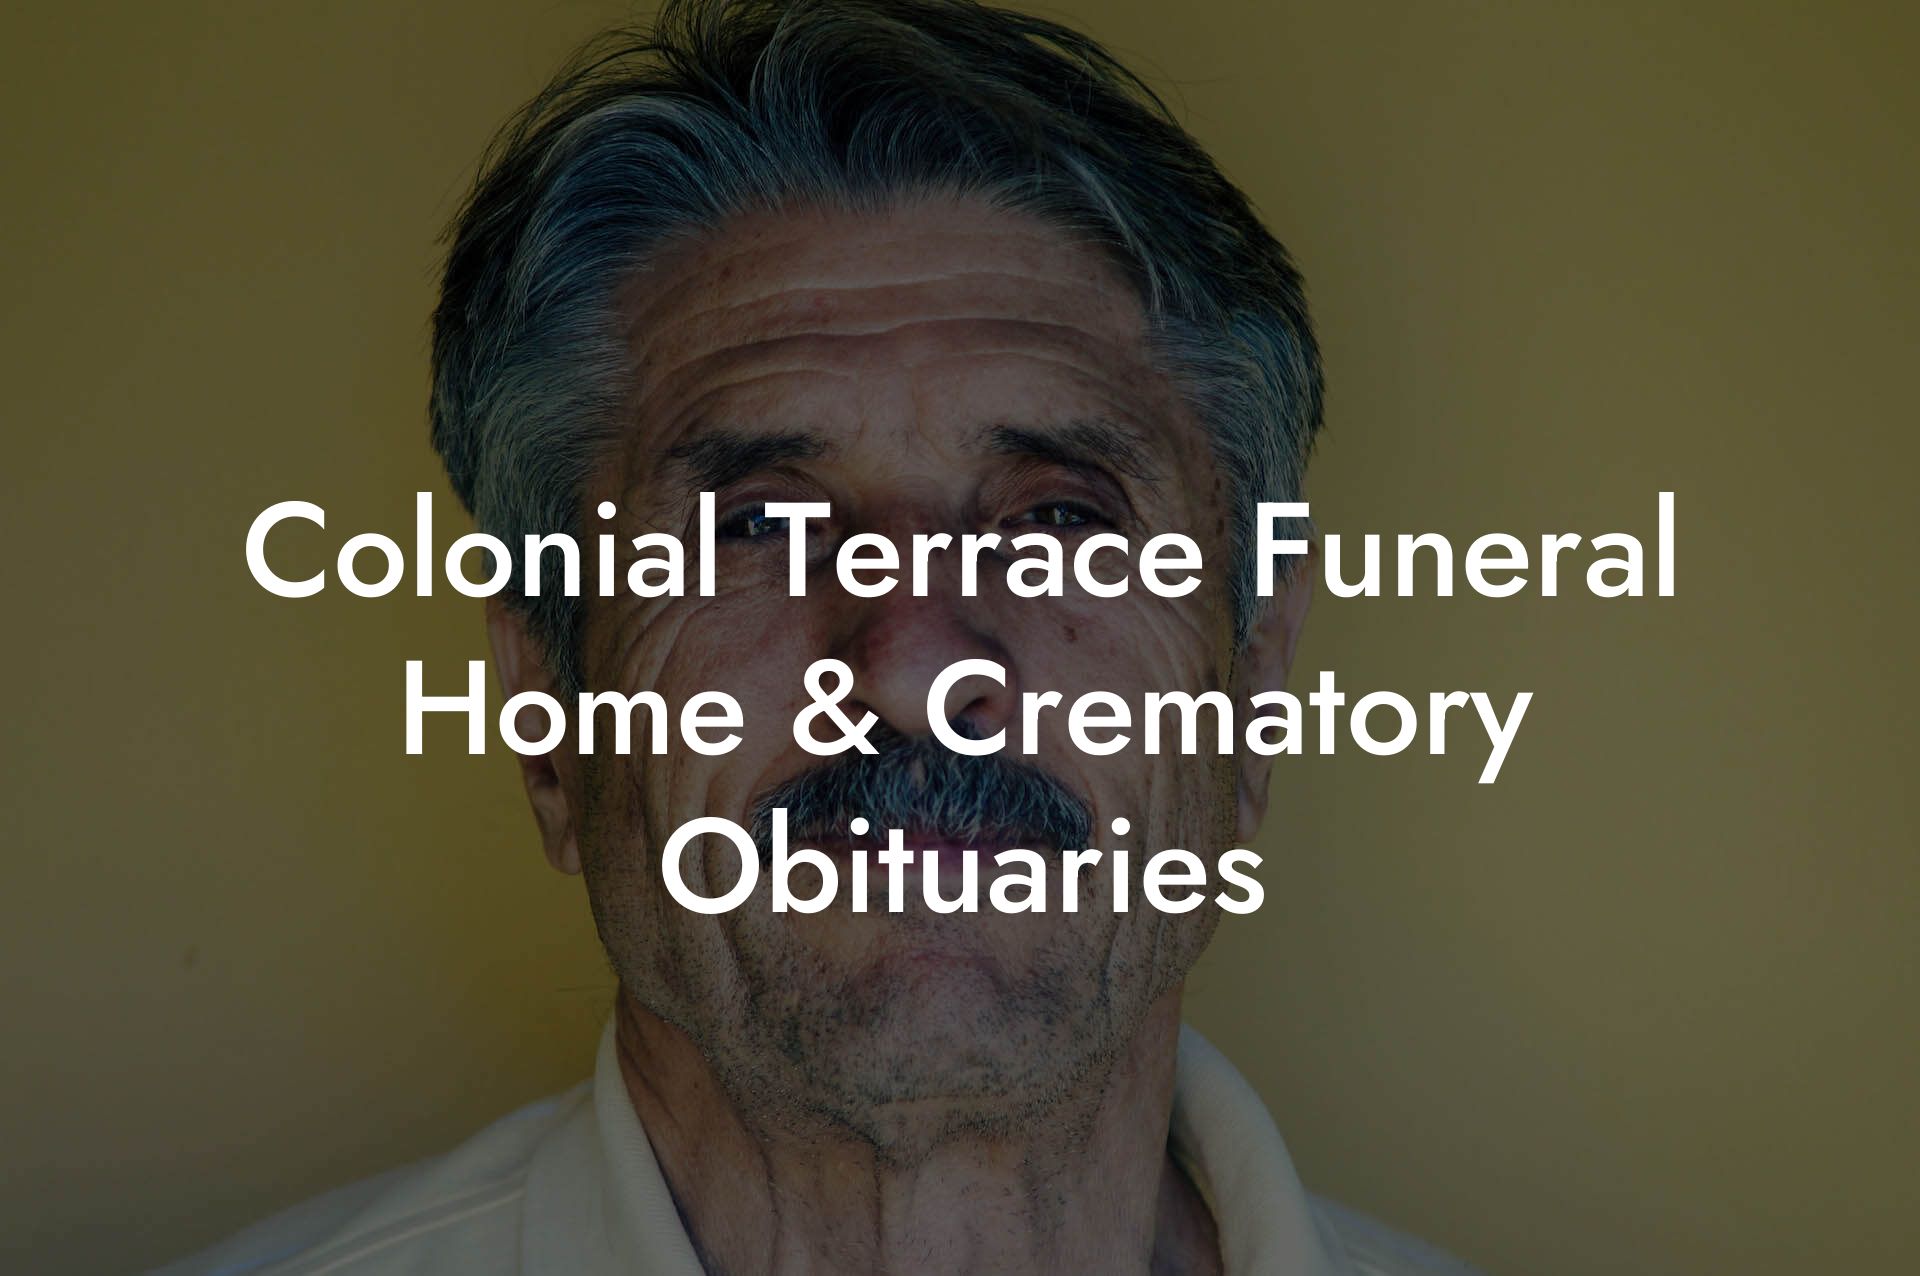 Colonial Terrace Funeral Home & Crematory Obituaries